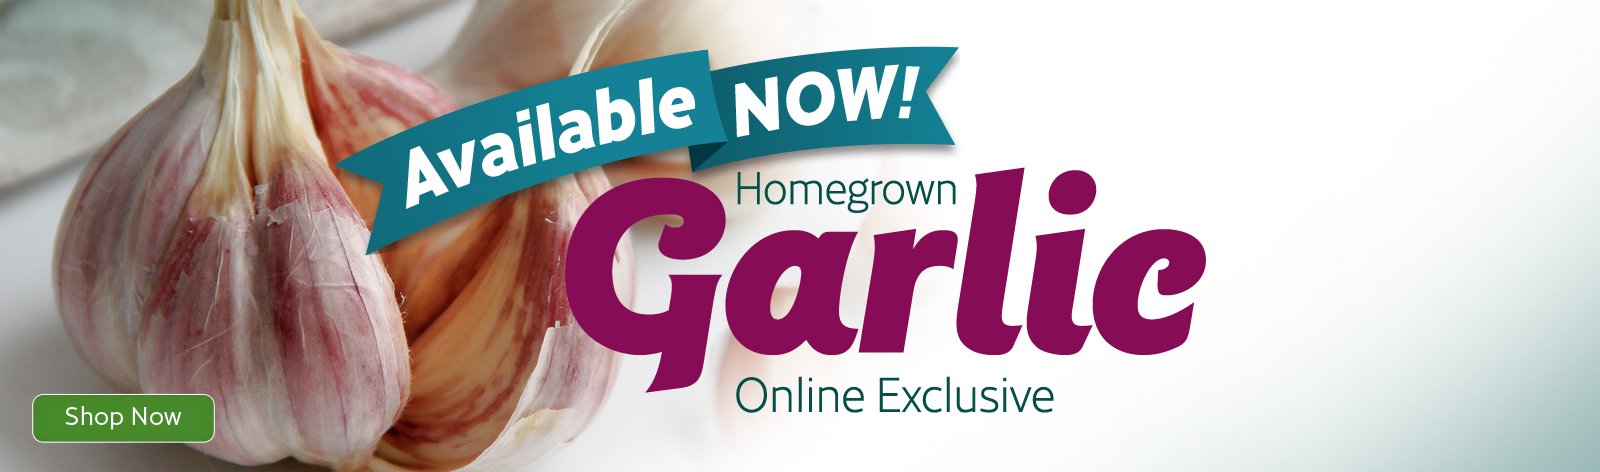 garlic available now